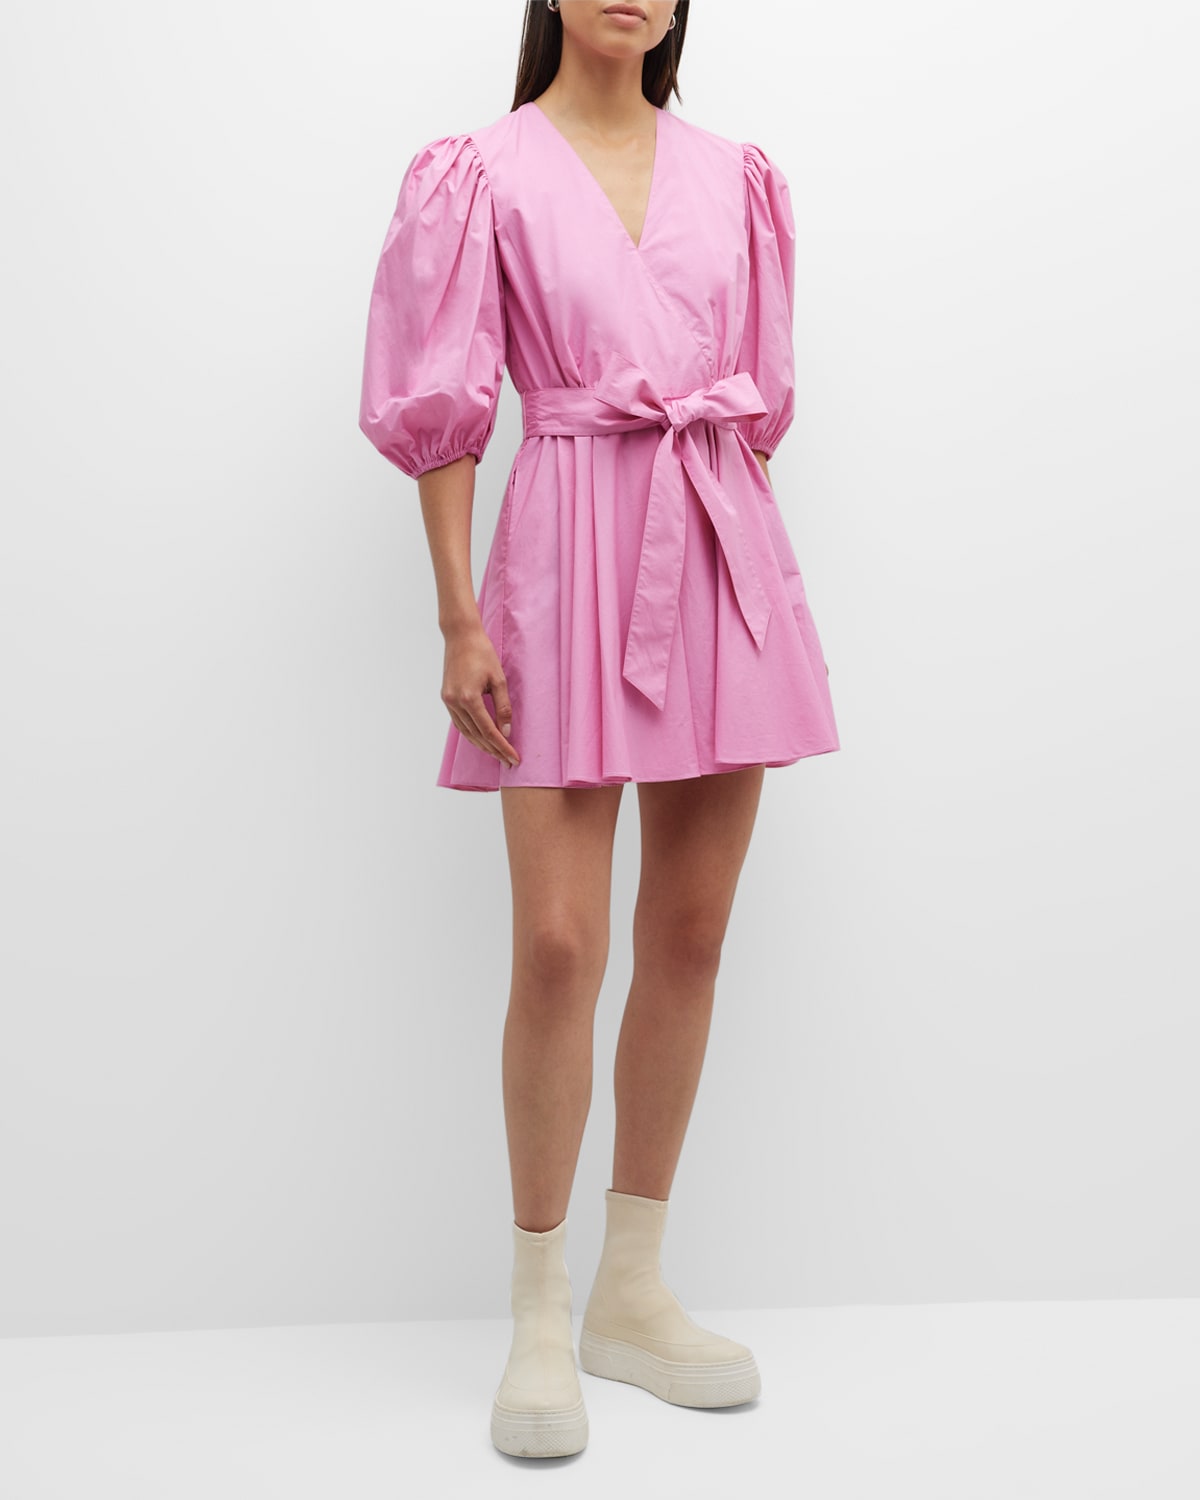 ARIAS New York Belted Bubble-Sleeve Mini Dress